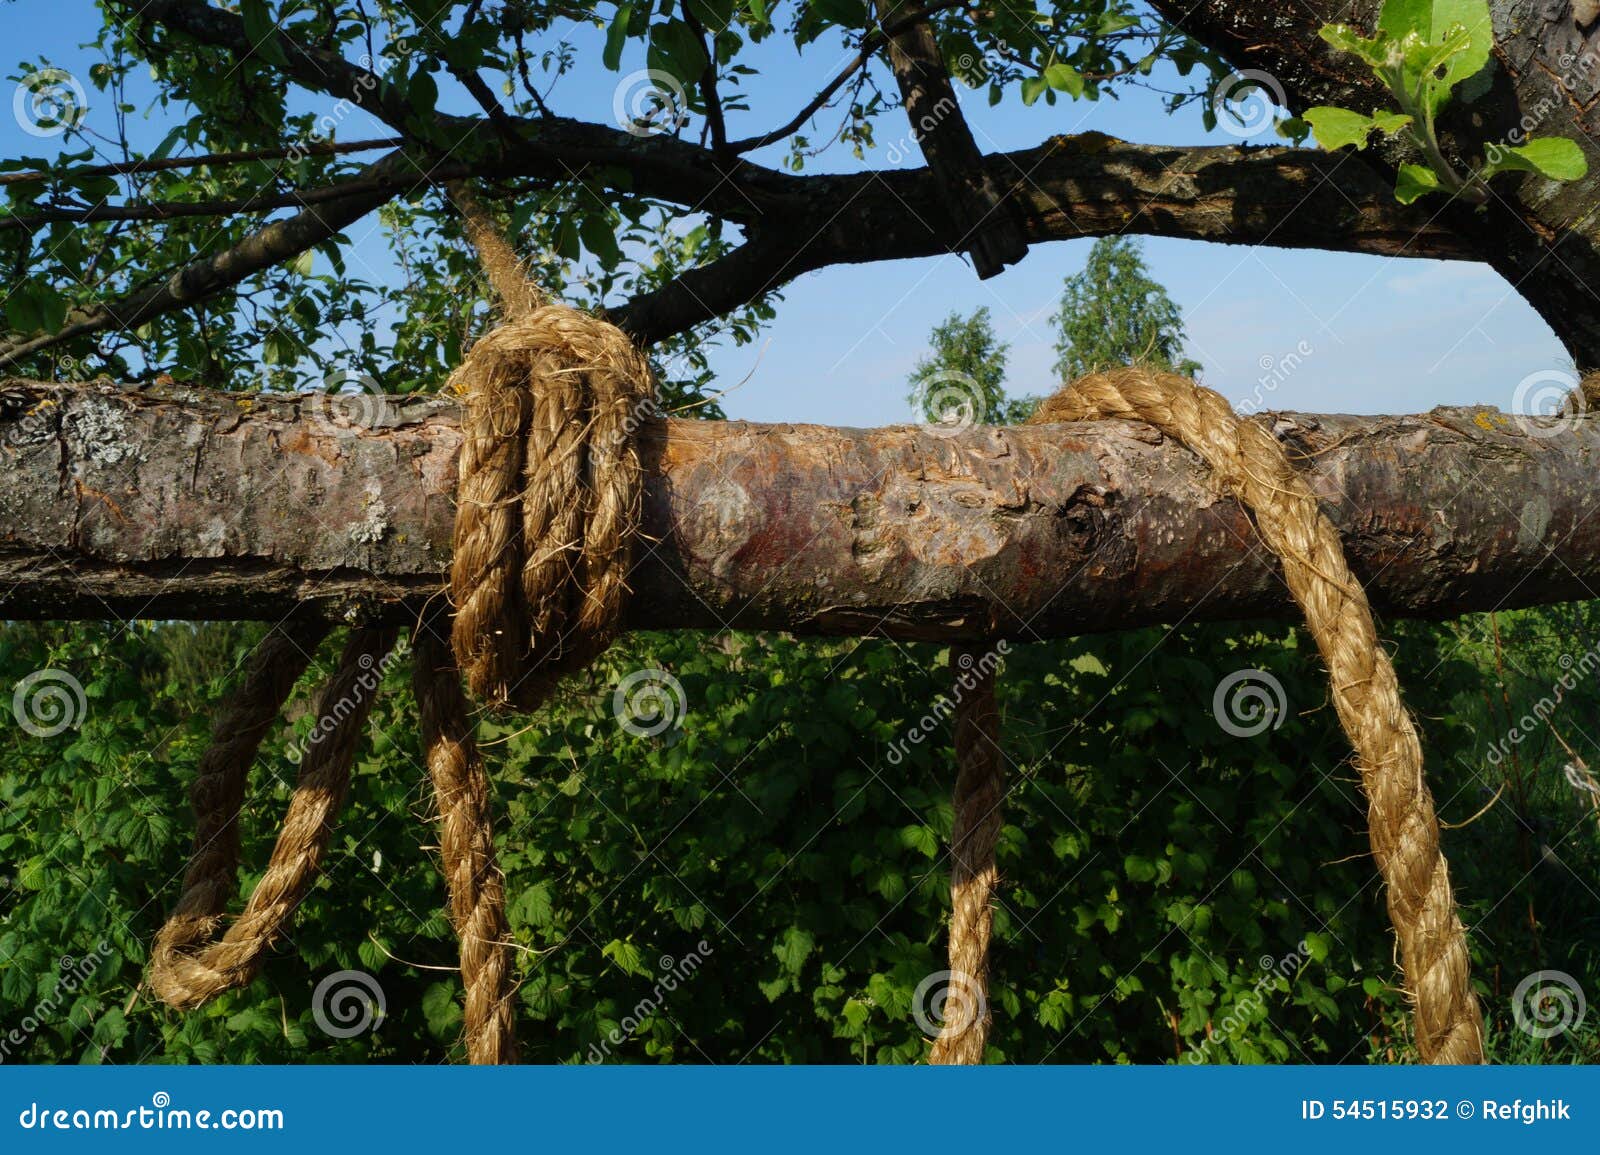 Rope on a tree branch stock photo. Image of vegetable - 54515932